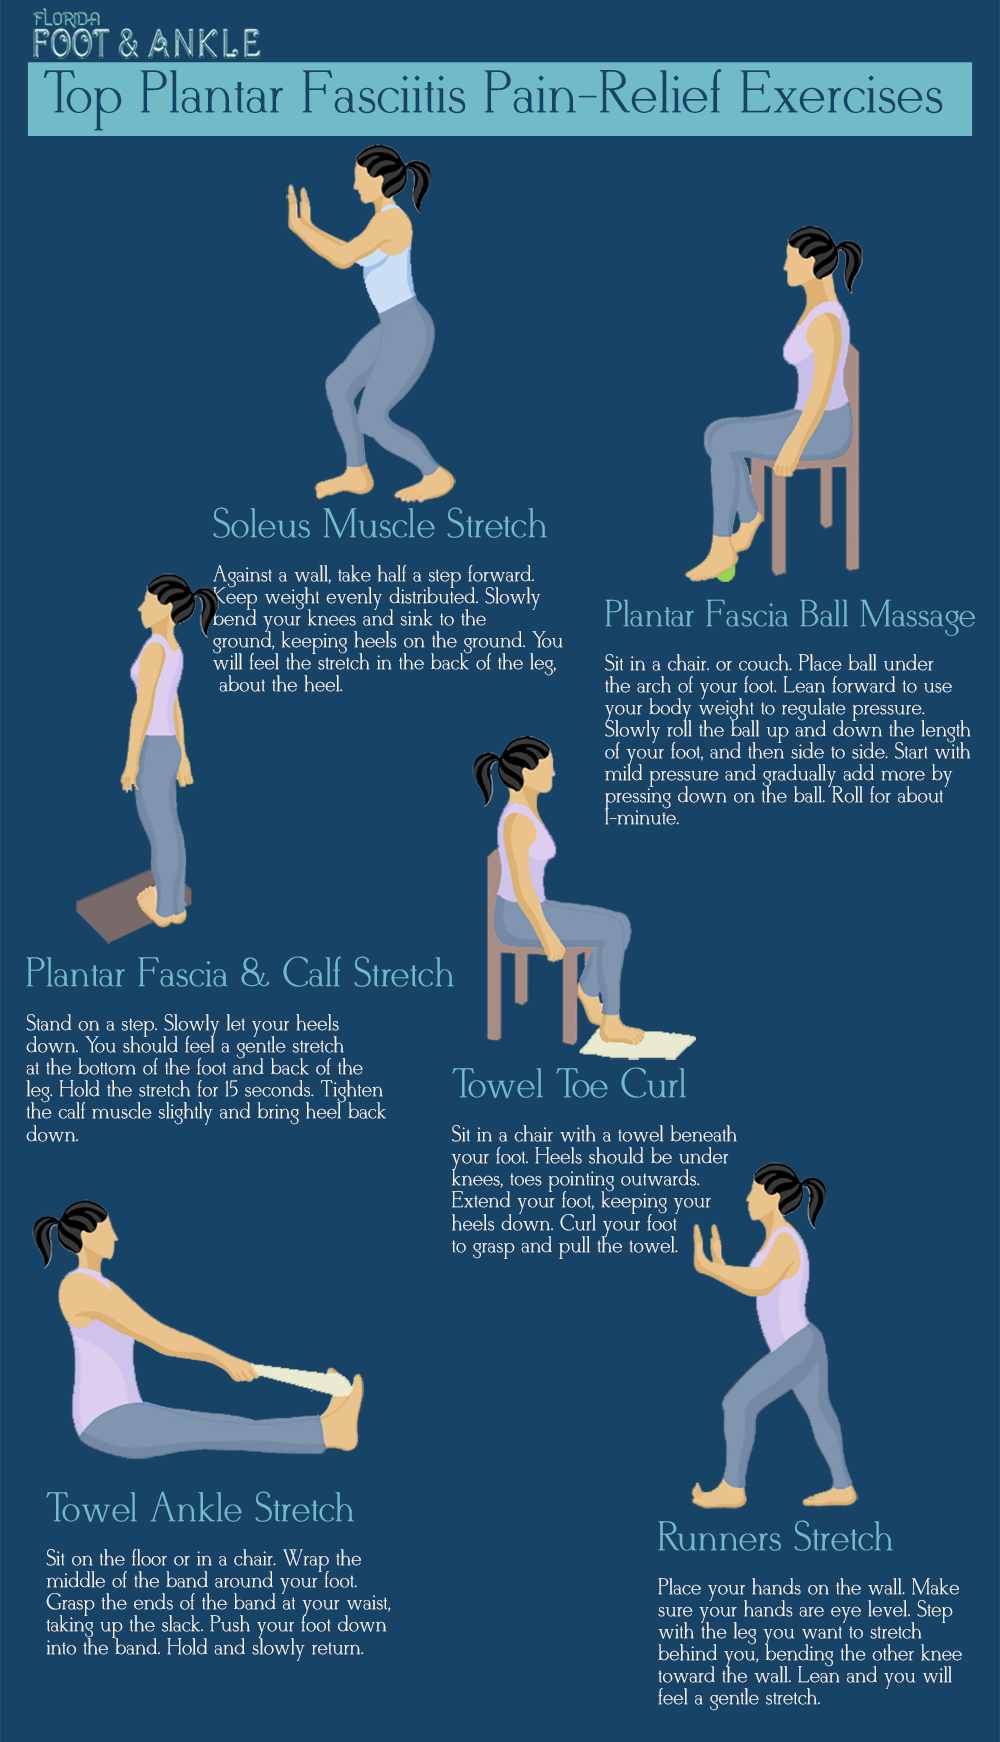 Foot and ankle stretches for runners